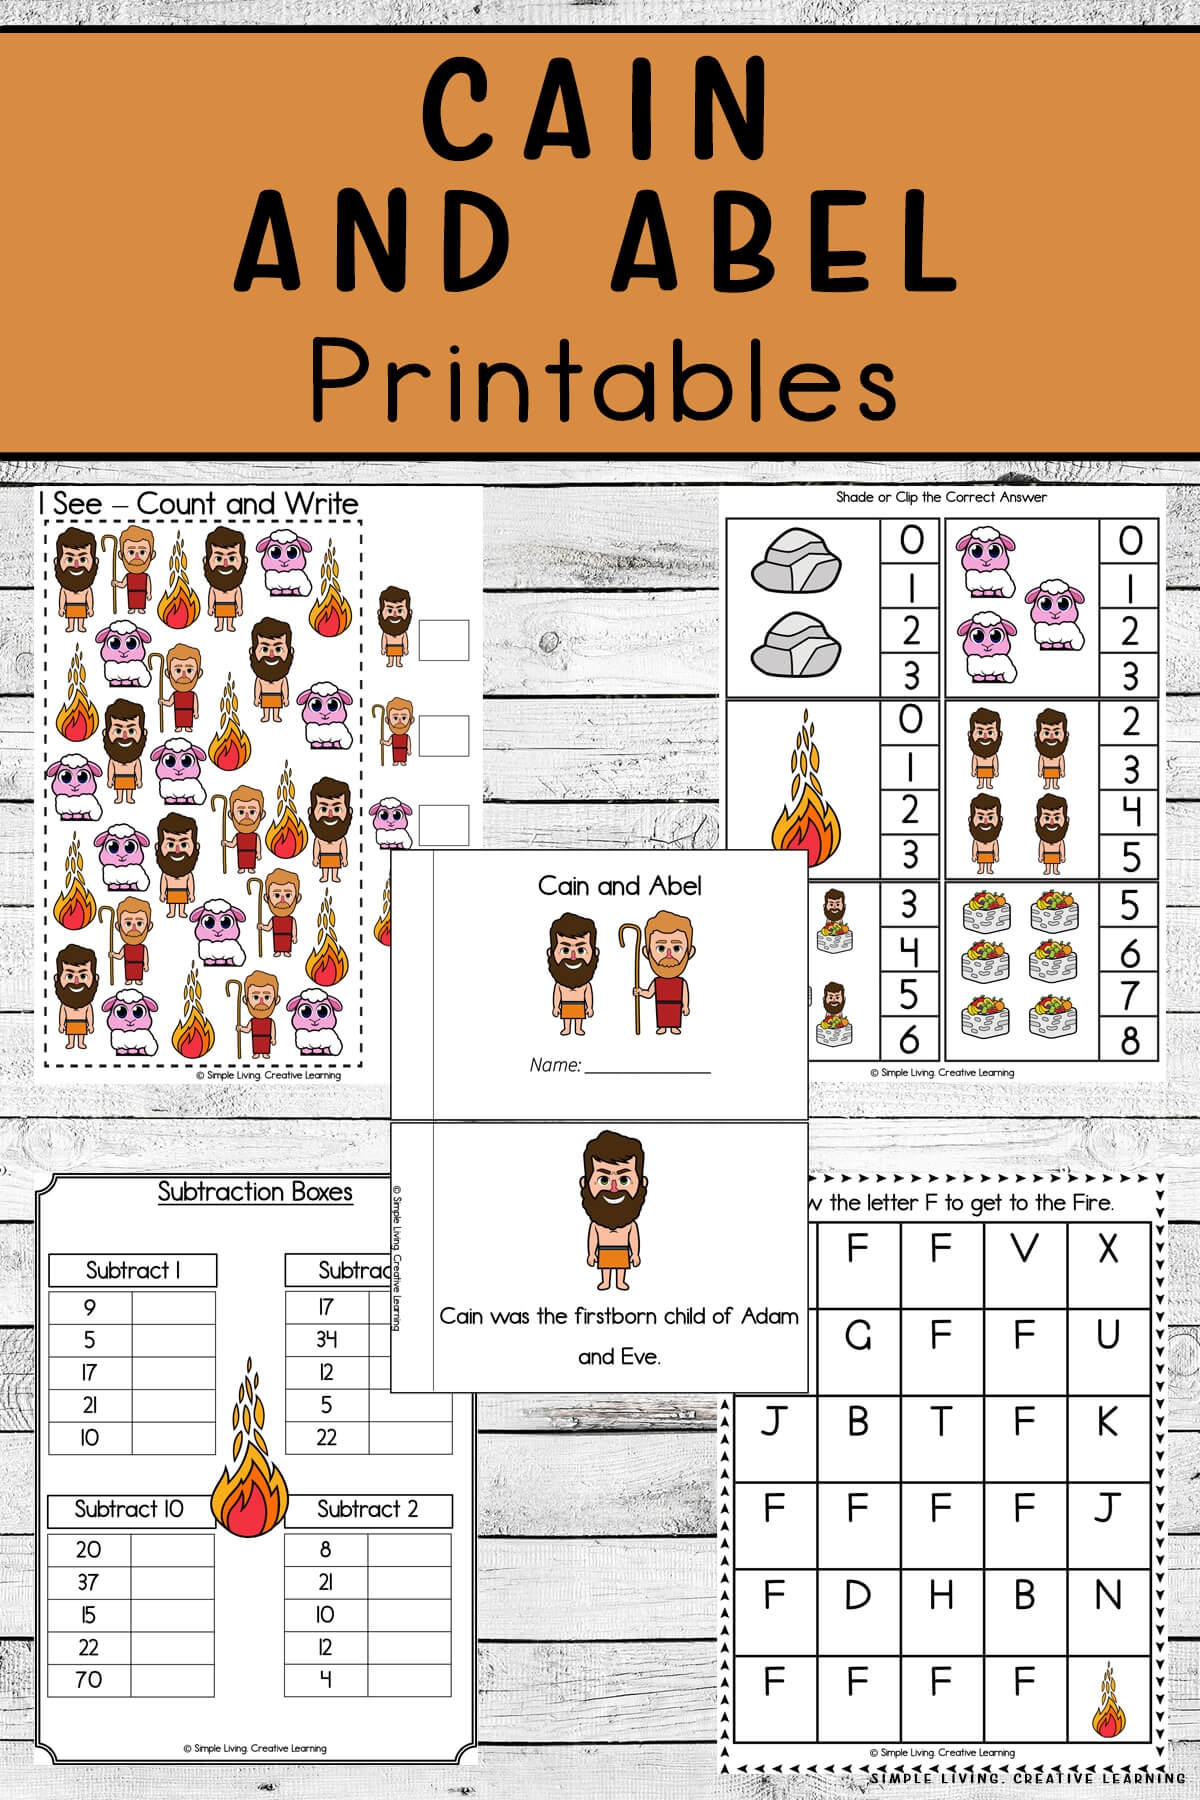 Cain And Abel Printables Simple Living Creative Learning